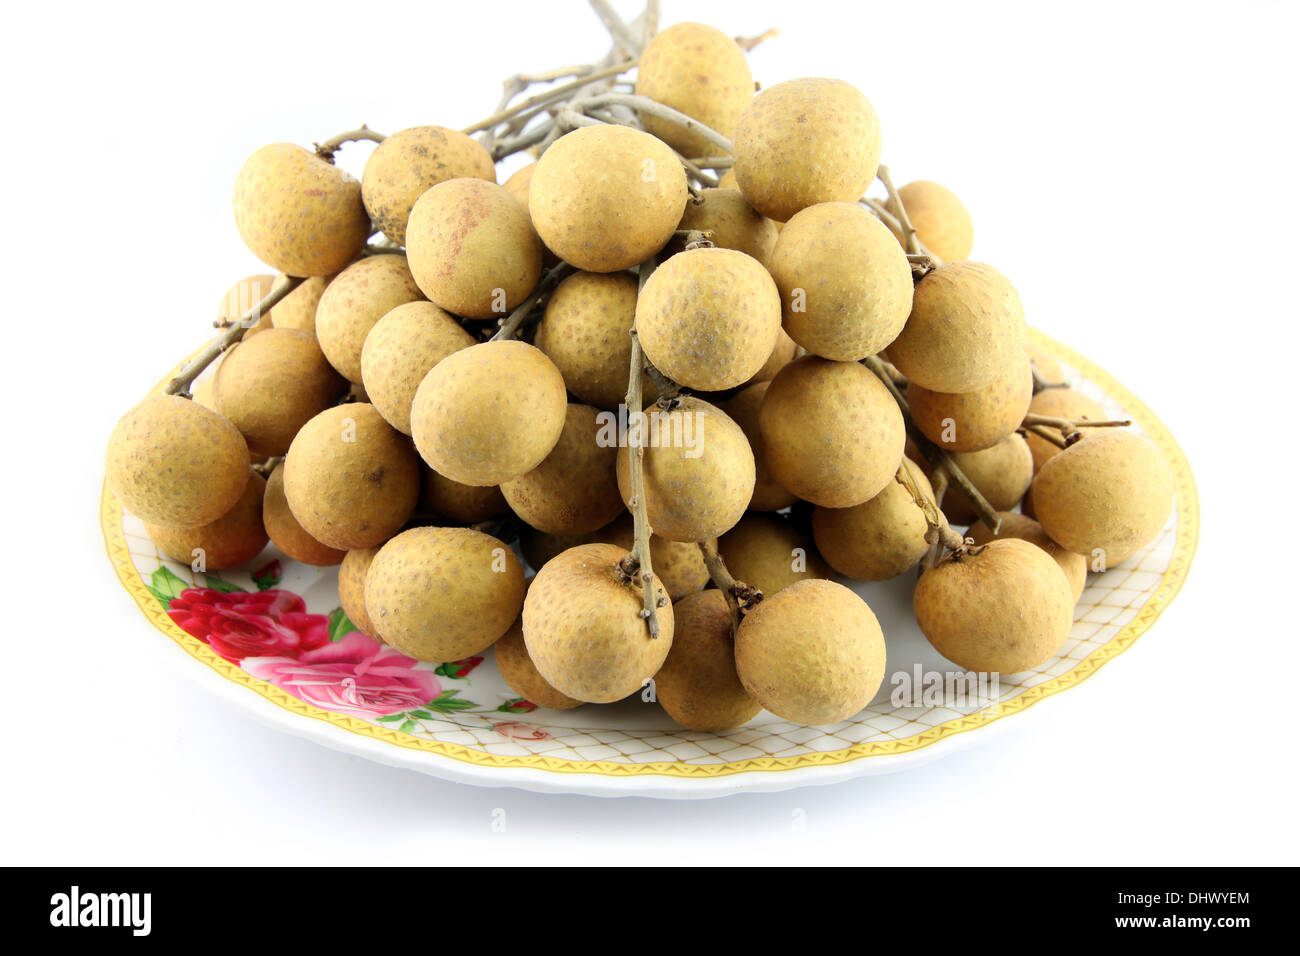 Fresh Longan tied together, placed in a dish on white background. Stock Photo